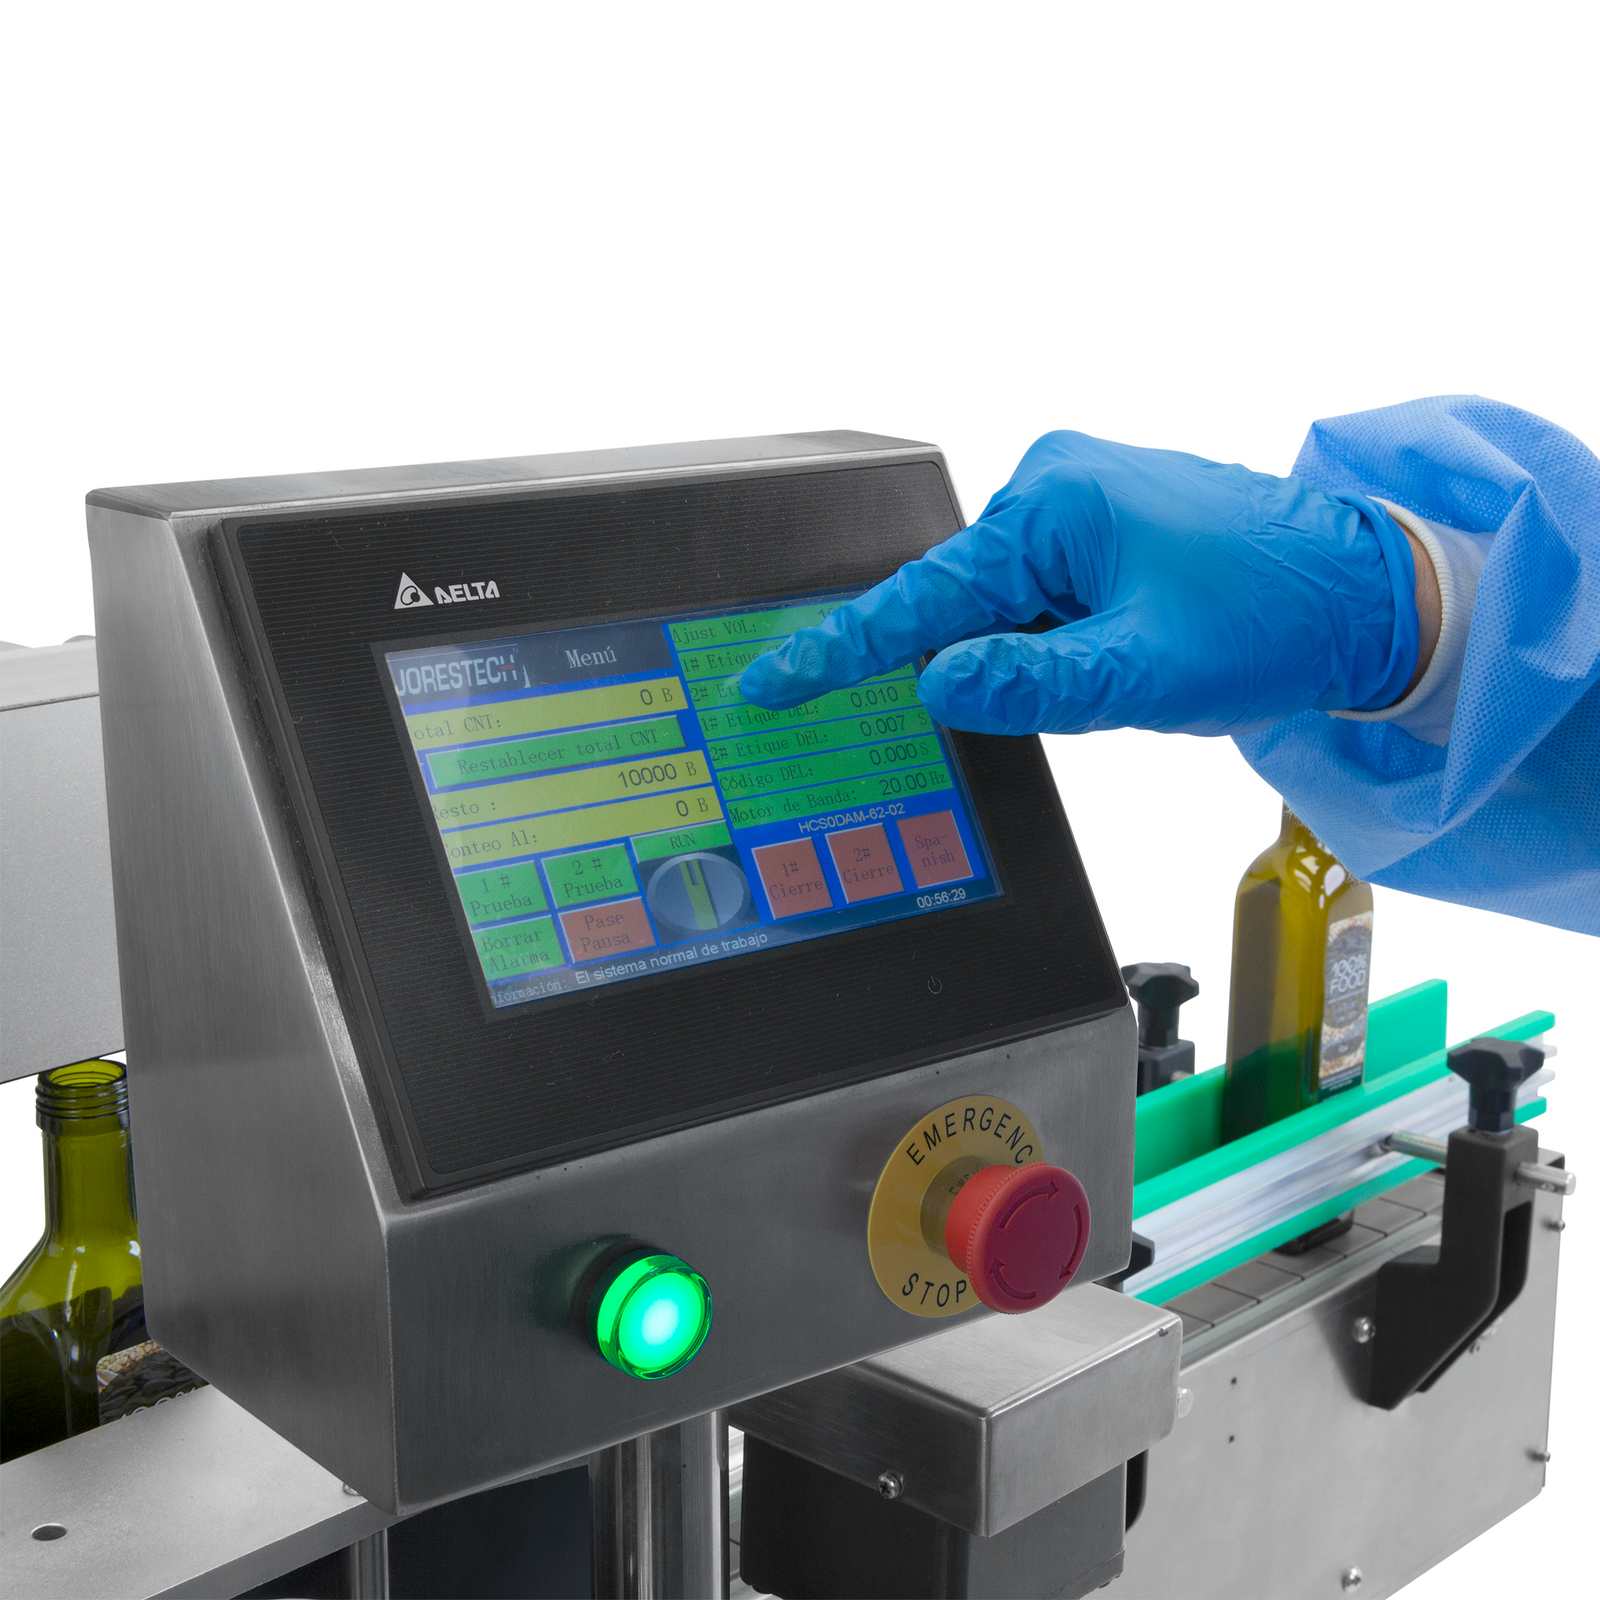 operator wearing blue disposable nitrile gloves using the digital control panel on the JORES TECHNOLOGIES® dual automatic label applicator